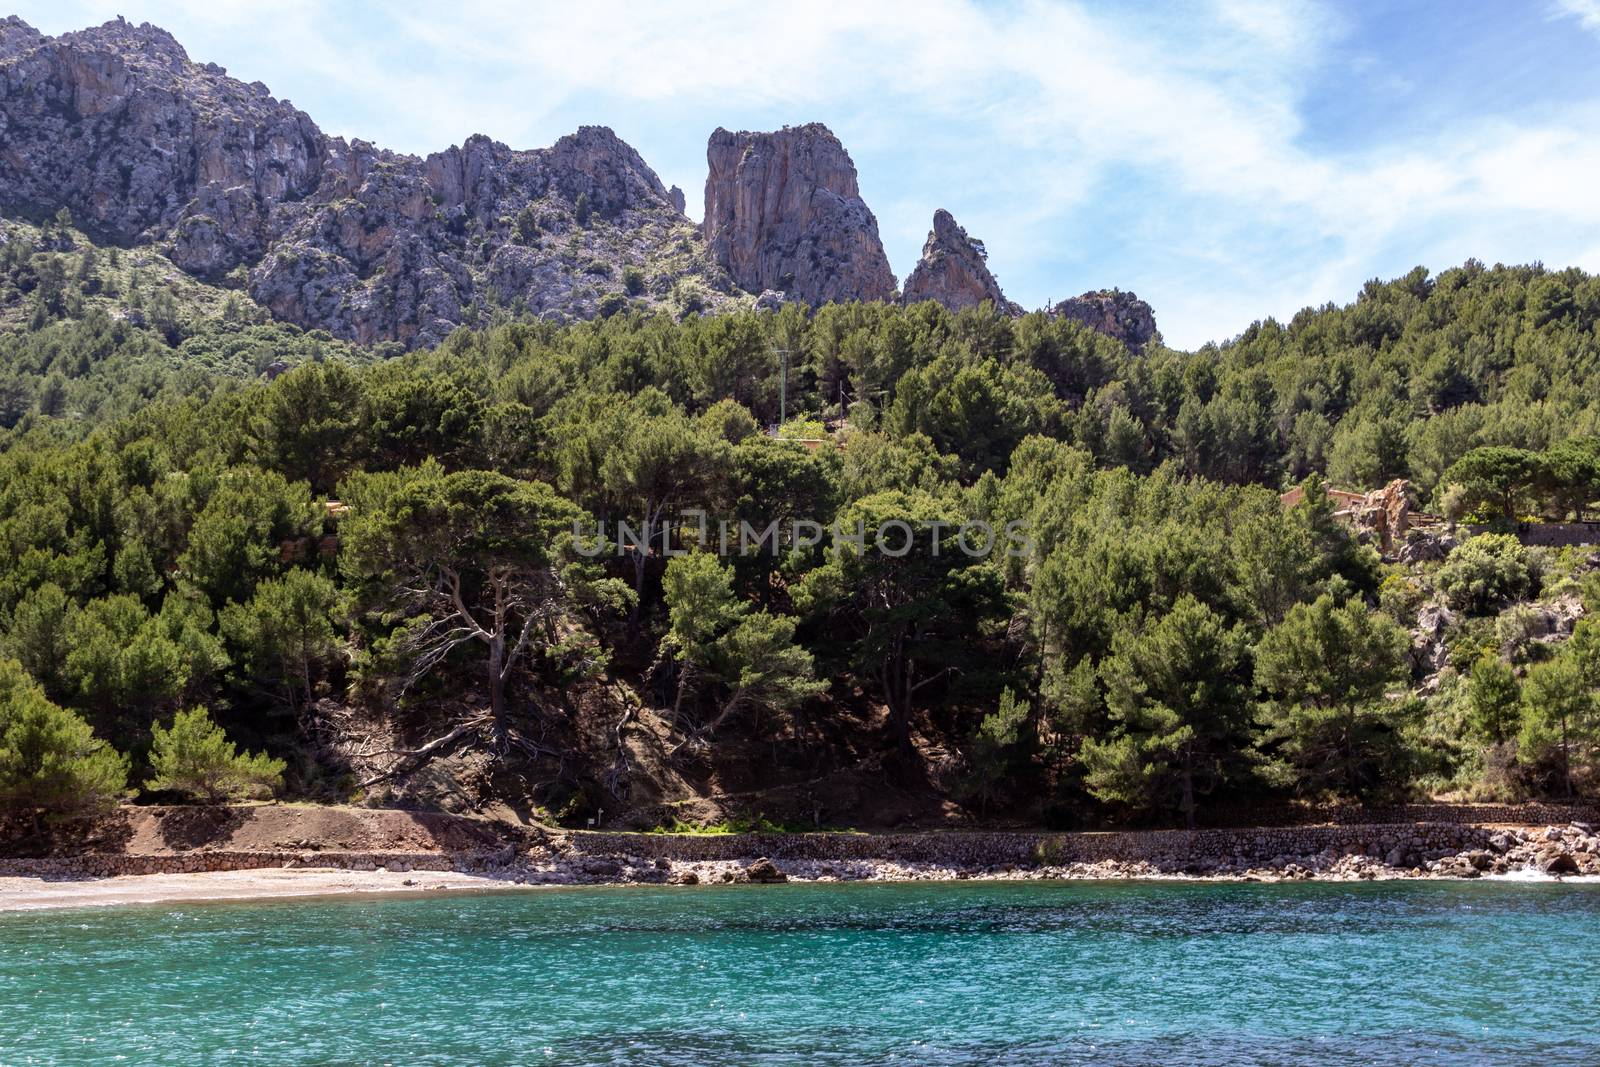 View on the coast at bay Cala Tuent on balearic island Mallorca, Spain on a sunny day with clear blue water and mountain range in background